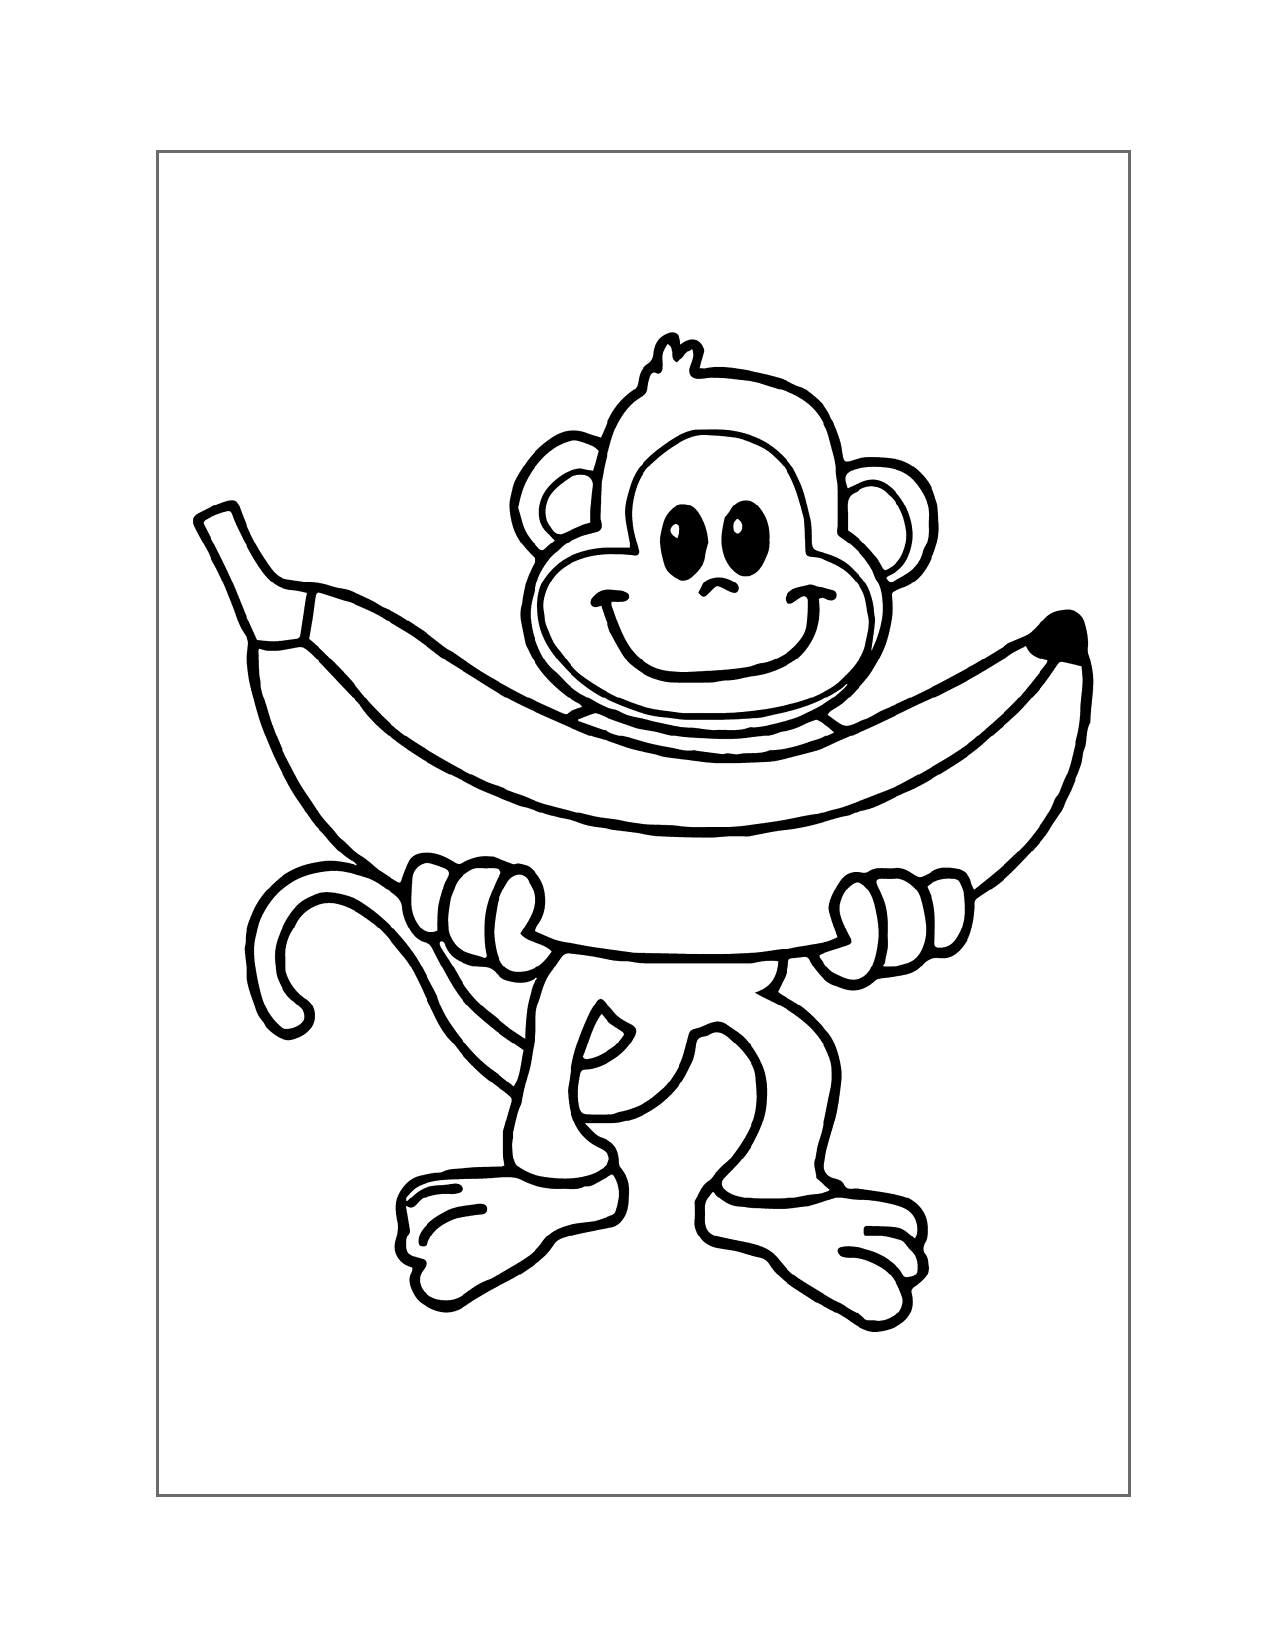 Monkey With Banana Coloring Page